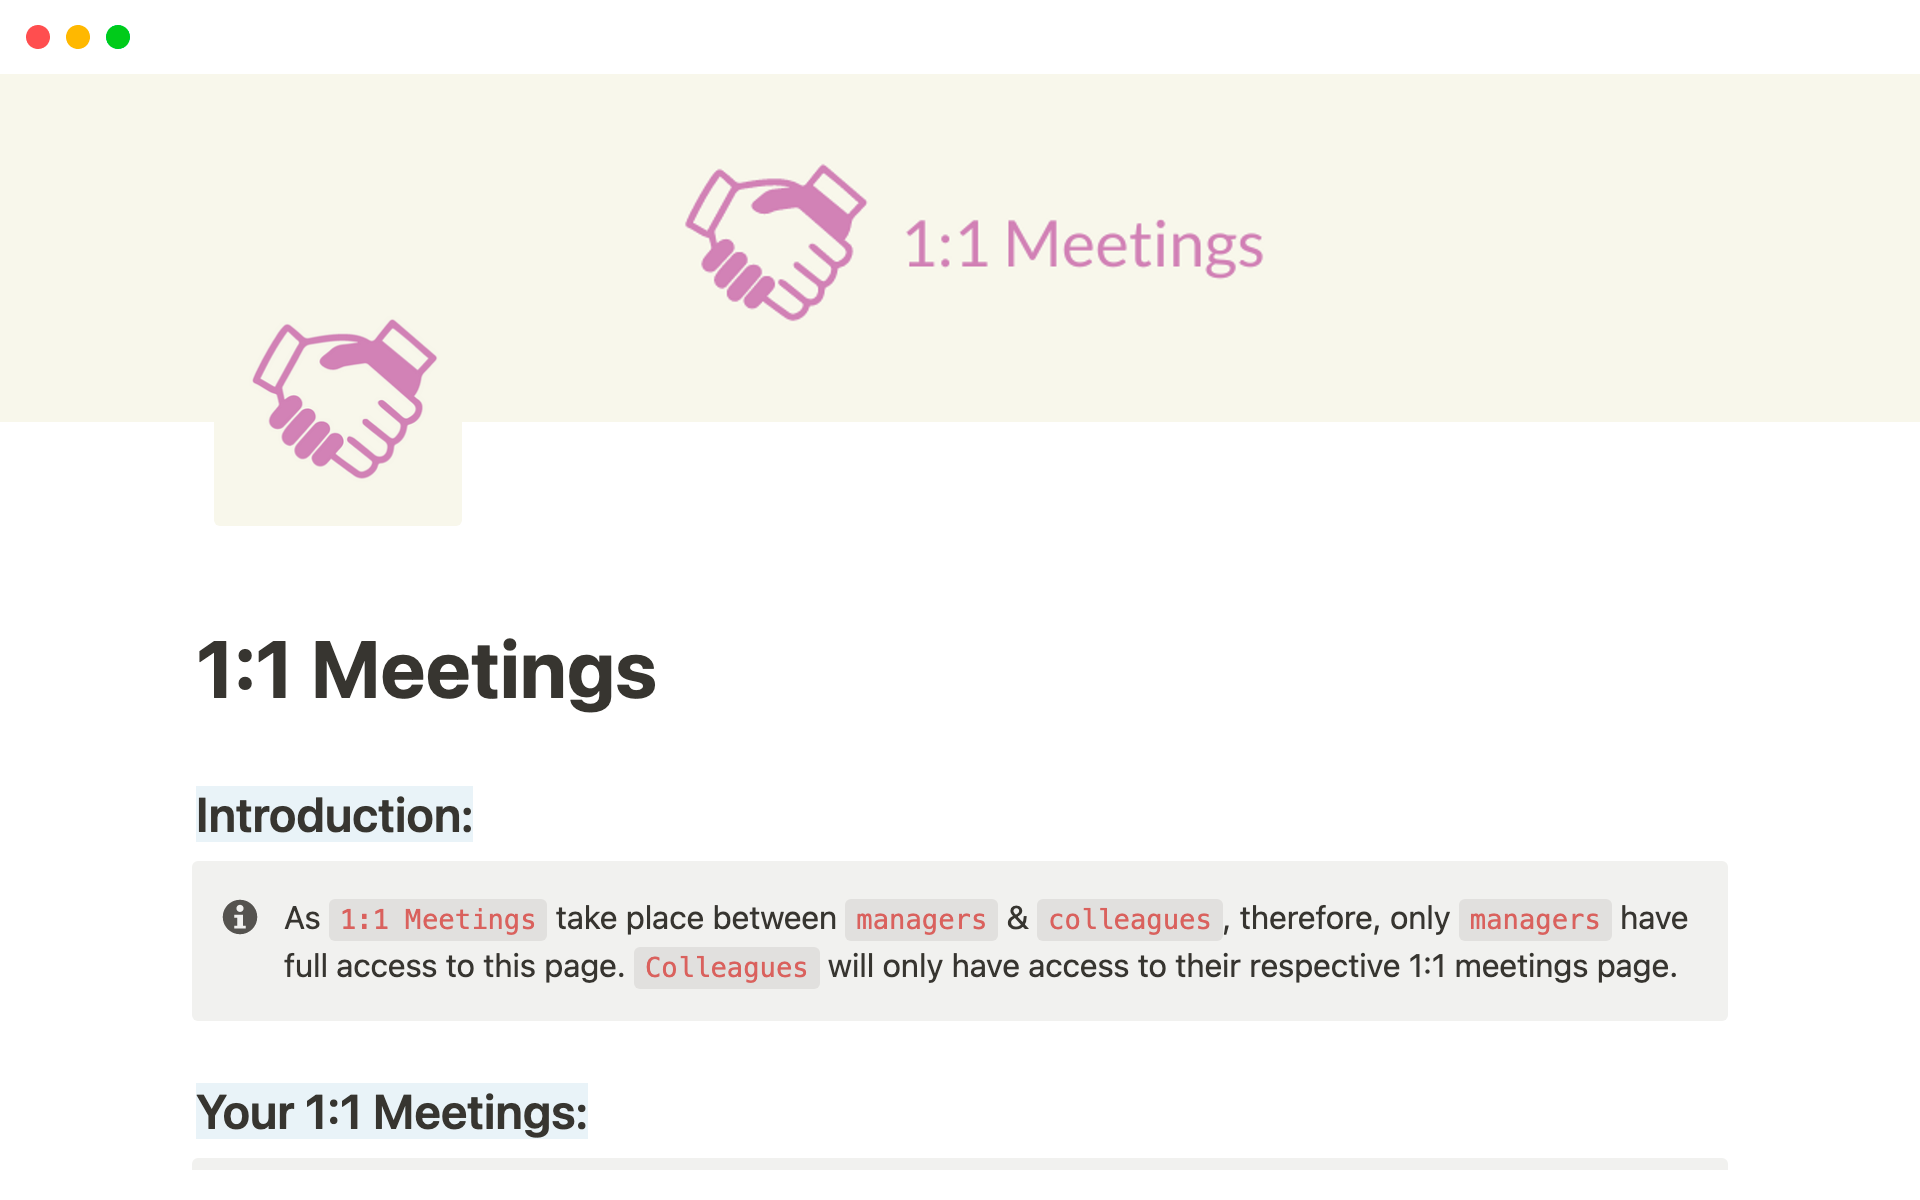 Effortlessly manage your 1:1 Meetings